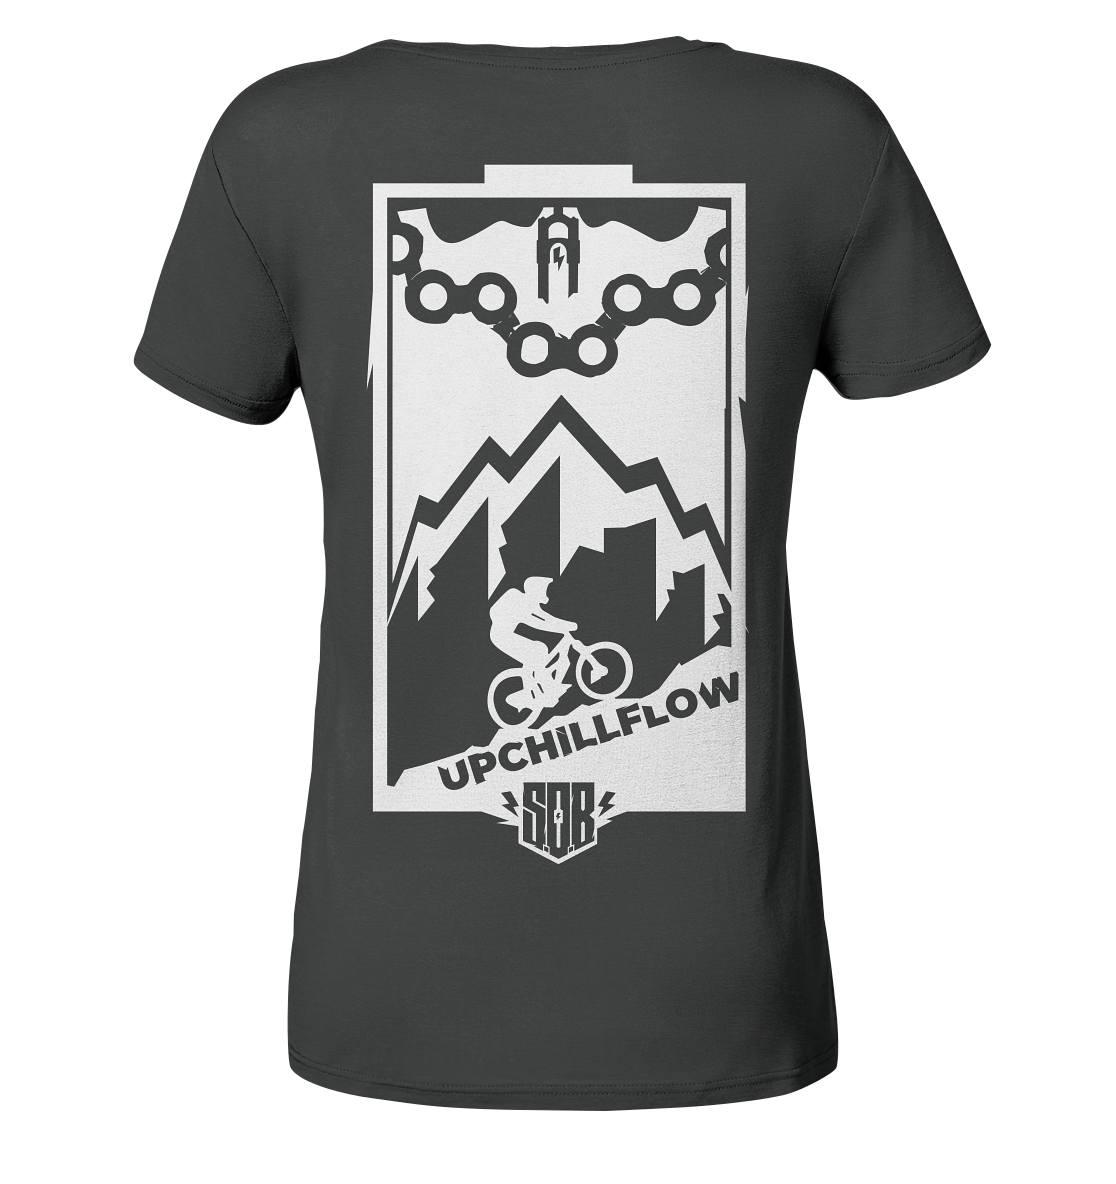 Sons of Battery® - E-MTB Brand & Community Lady-Shirts Anthracite / S Sons of Battery - Upchillflow - Ladies Organic Shirt E-Bike-Community